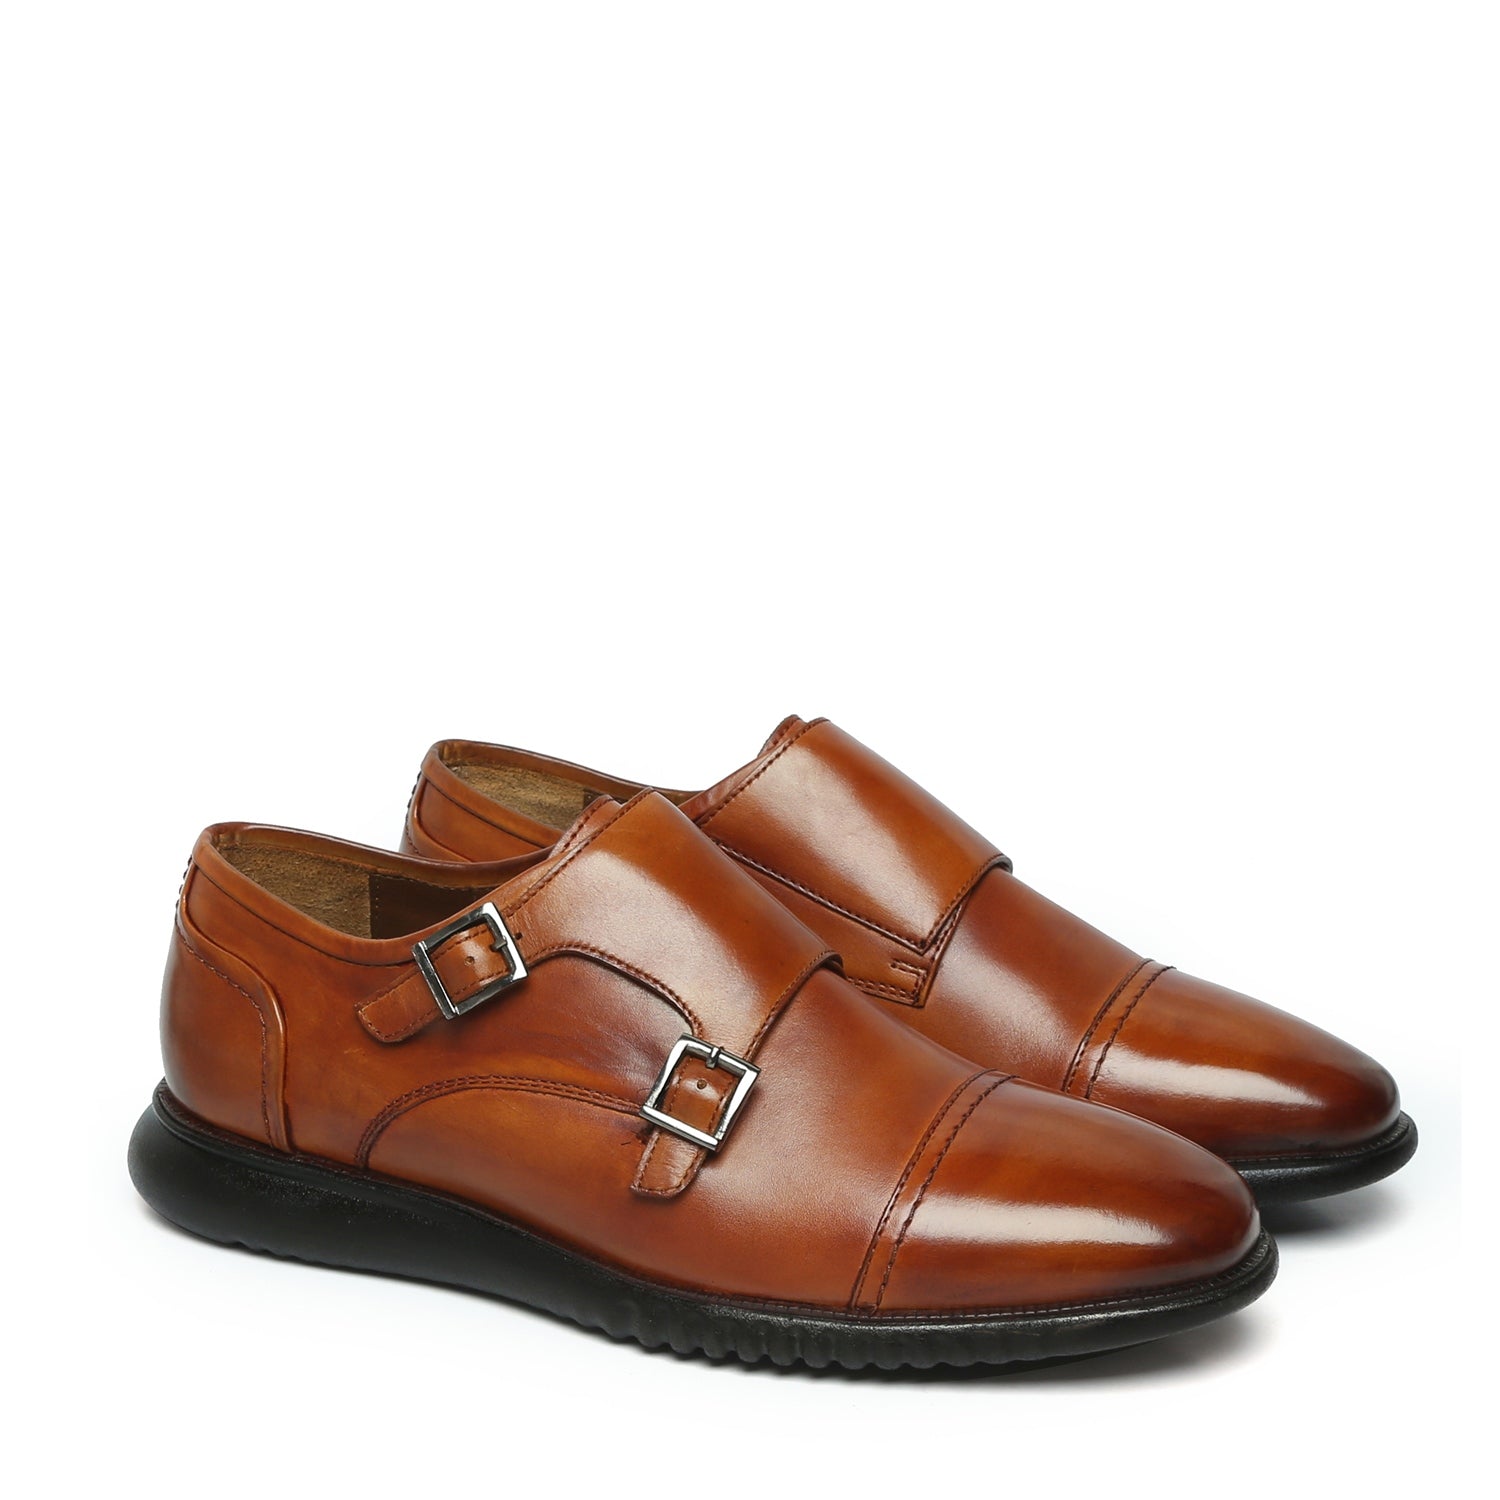 Cap Toe Tan Leather Light Weight Double Monk Shoes by Brune & Bareskin